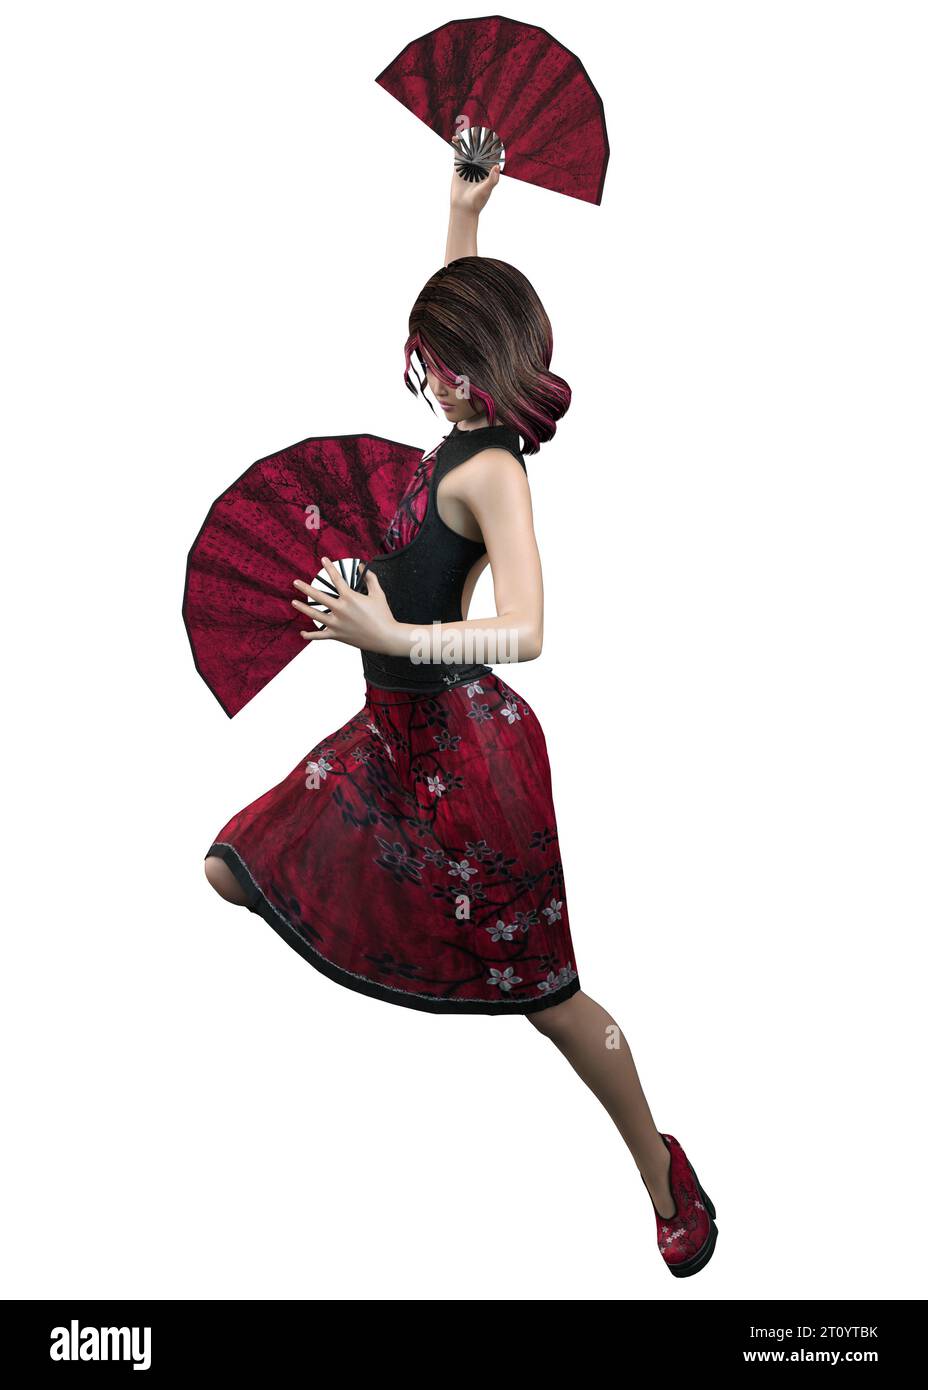 Young asian girl in hot pink dress holding two fans, 3D Illustration. Stock Photo